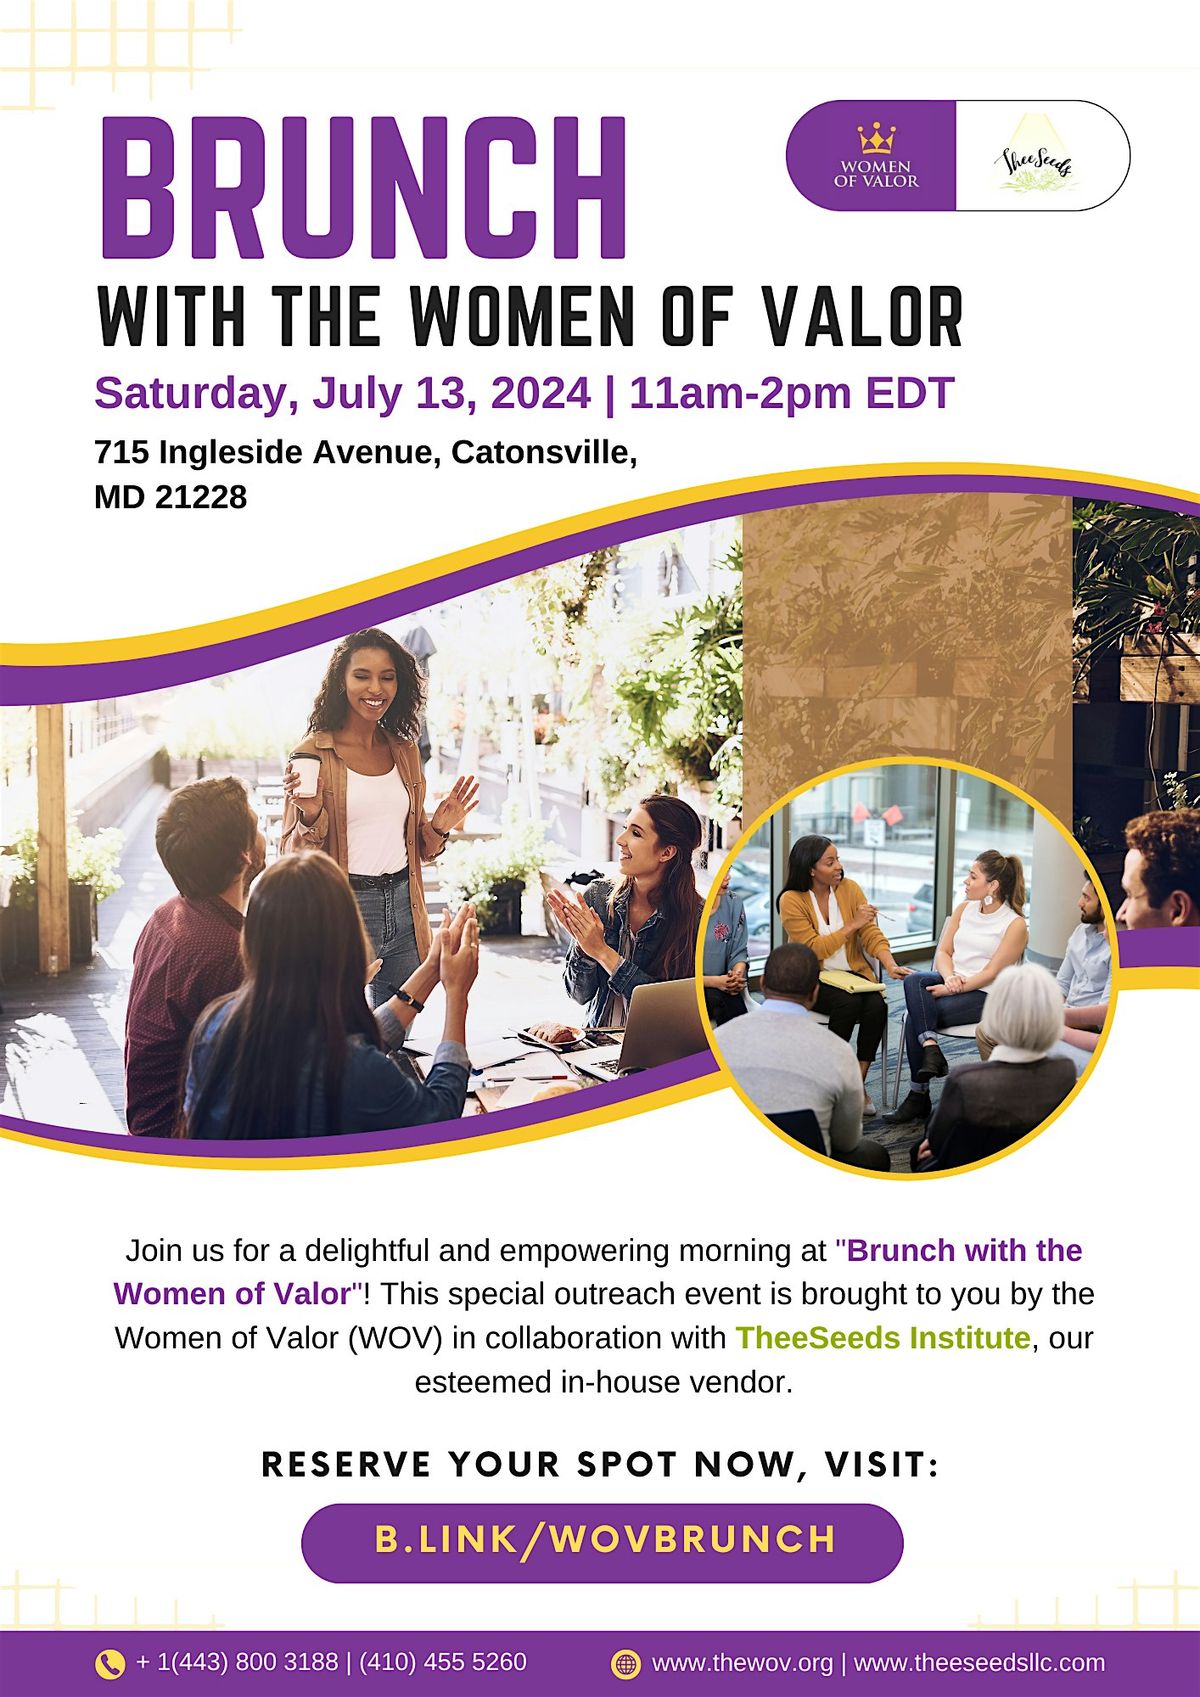 Brunch with the Women of Valor